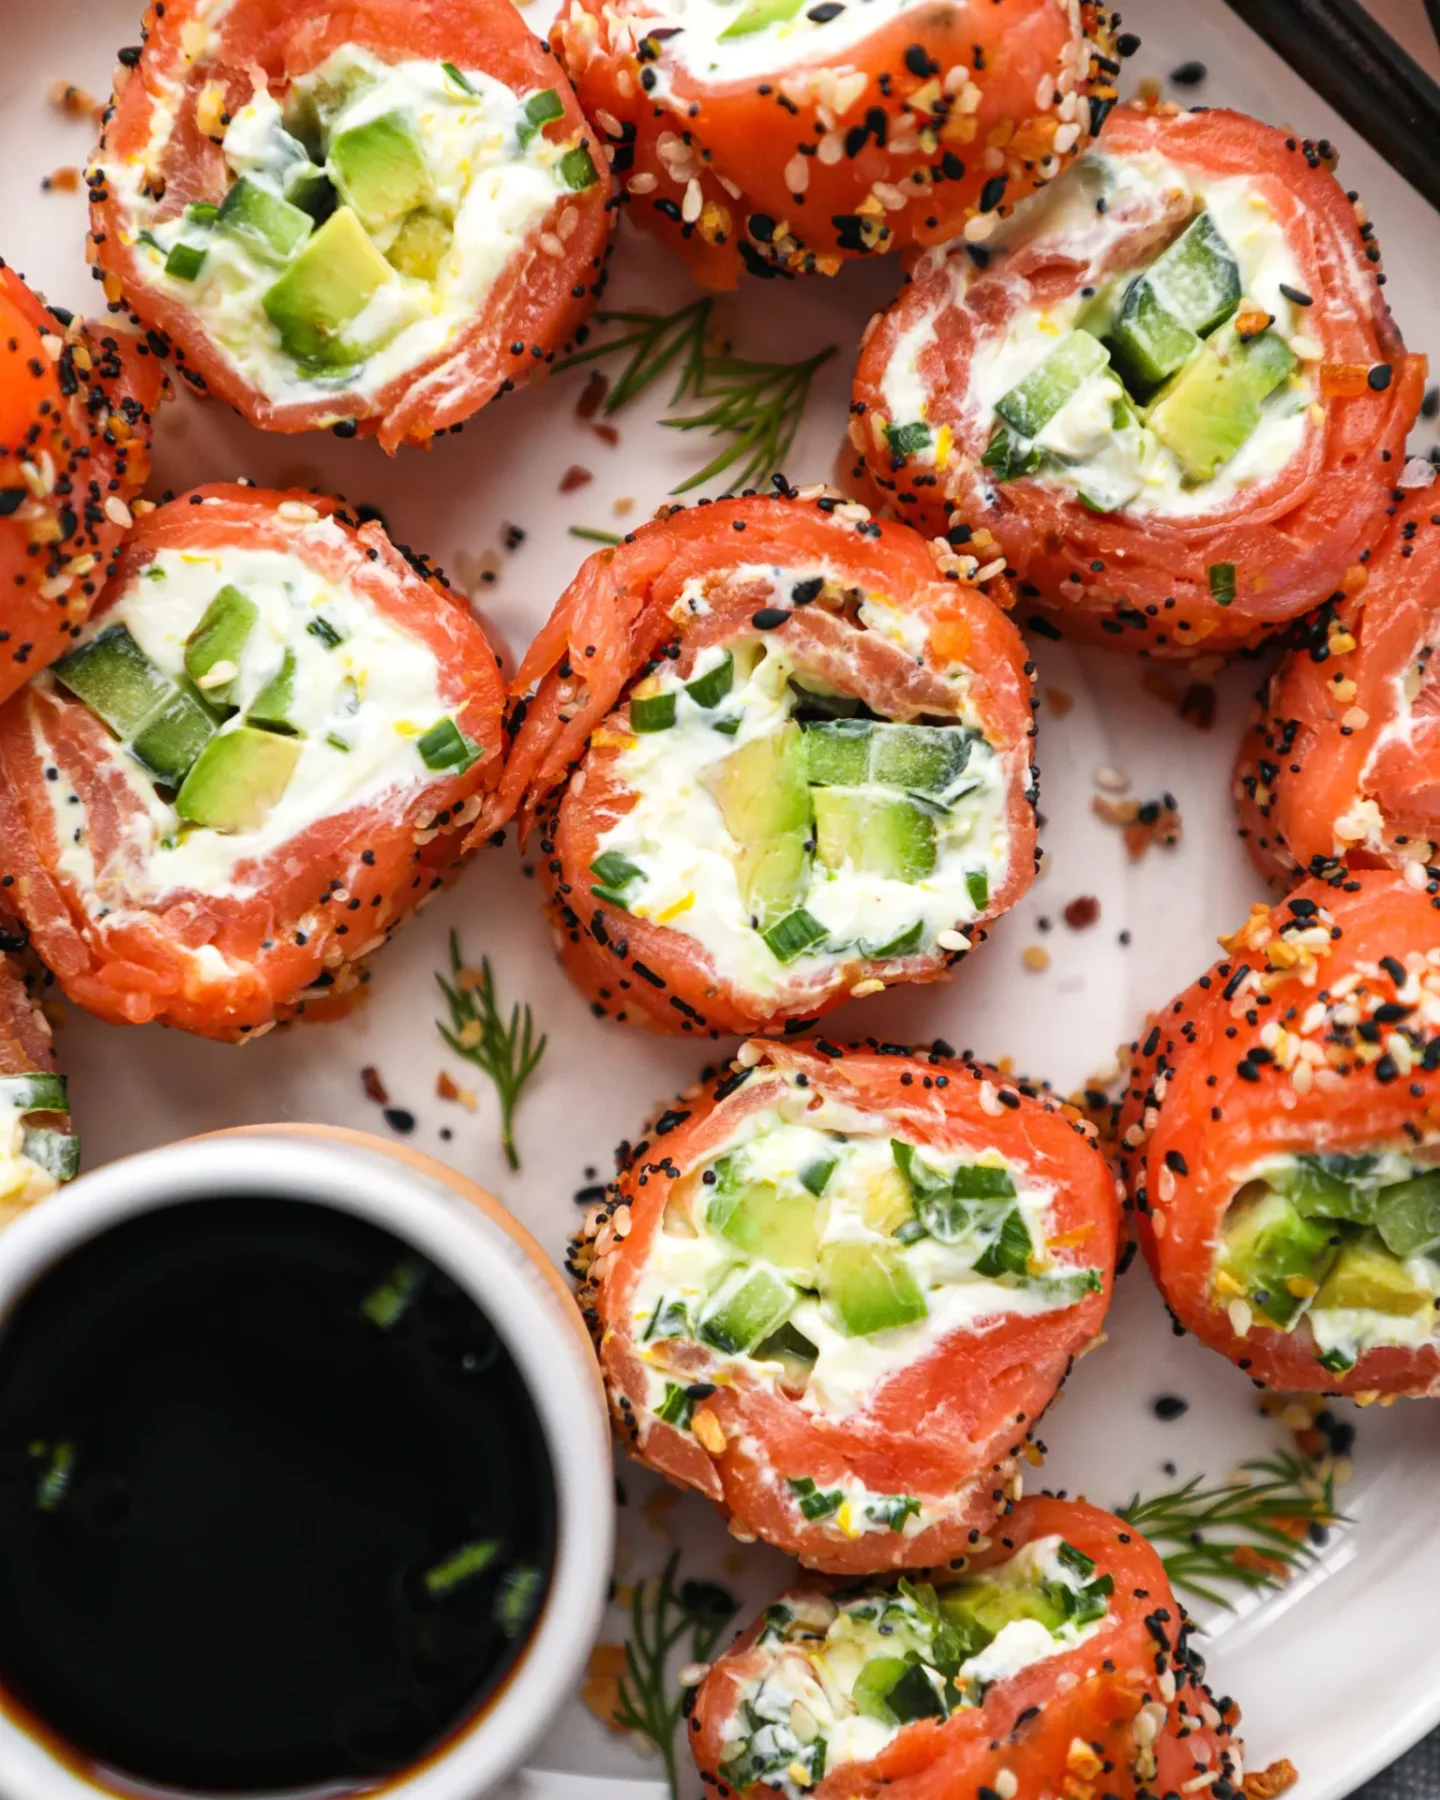 Smoked salmon sushi rolls with soy sauce